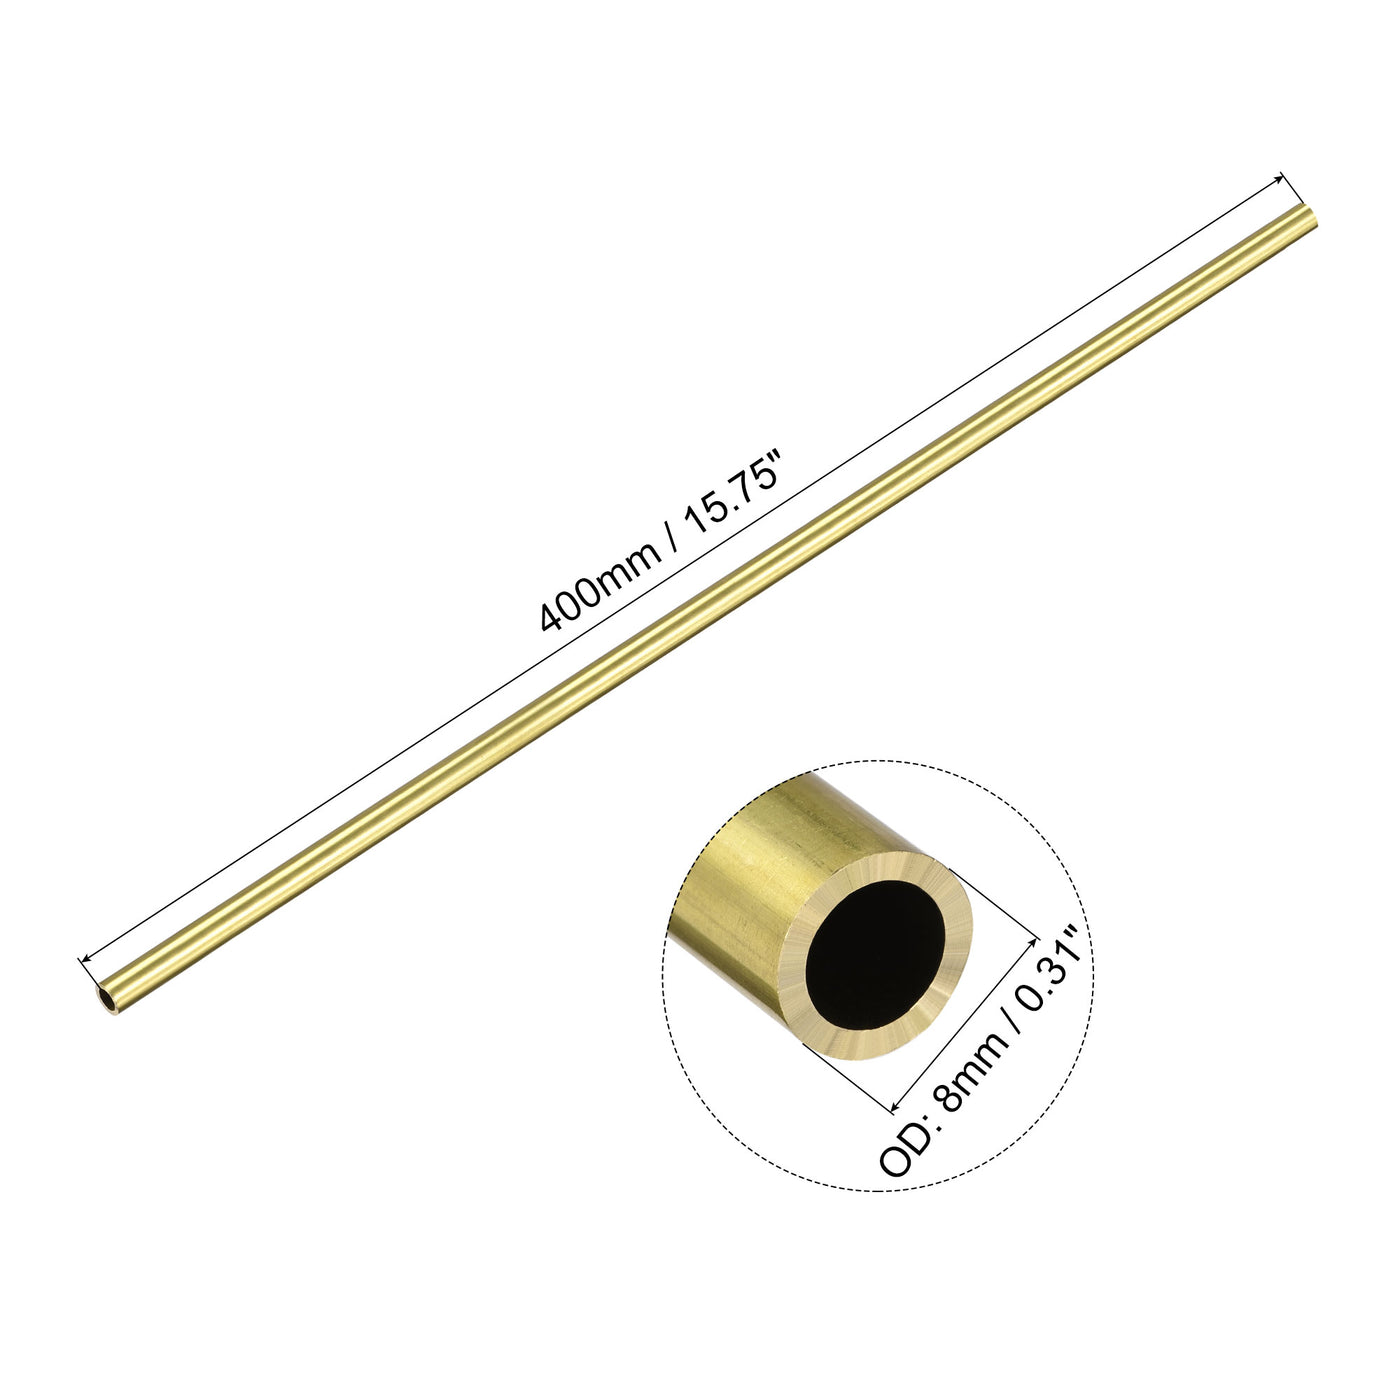 uxcell Uxcell 8mm x 1.5mm x 400mm Seamless Straight Brass Tube for Industry DIY Projects